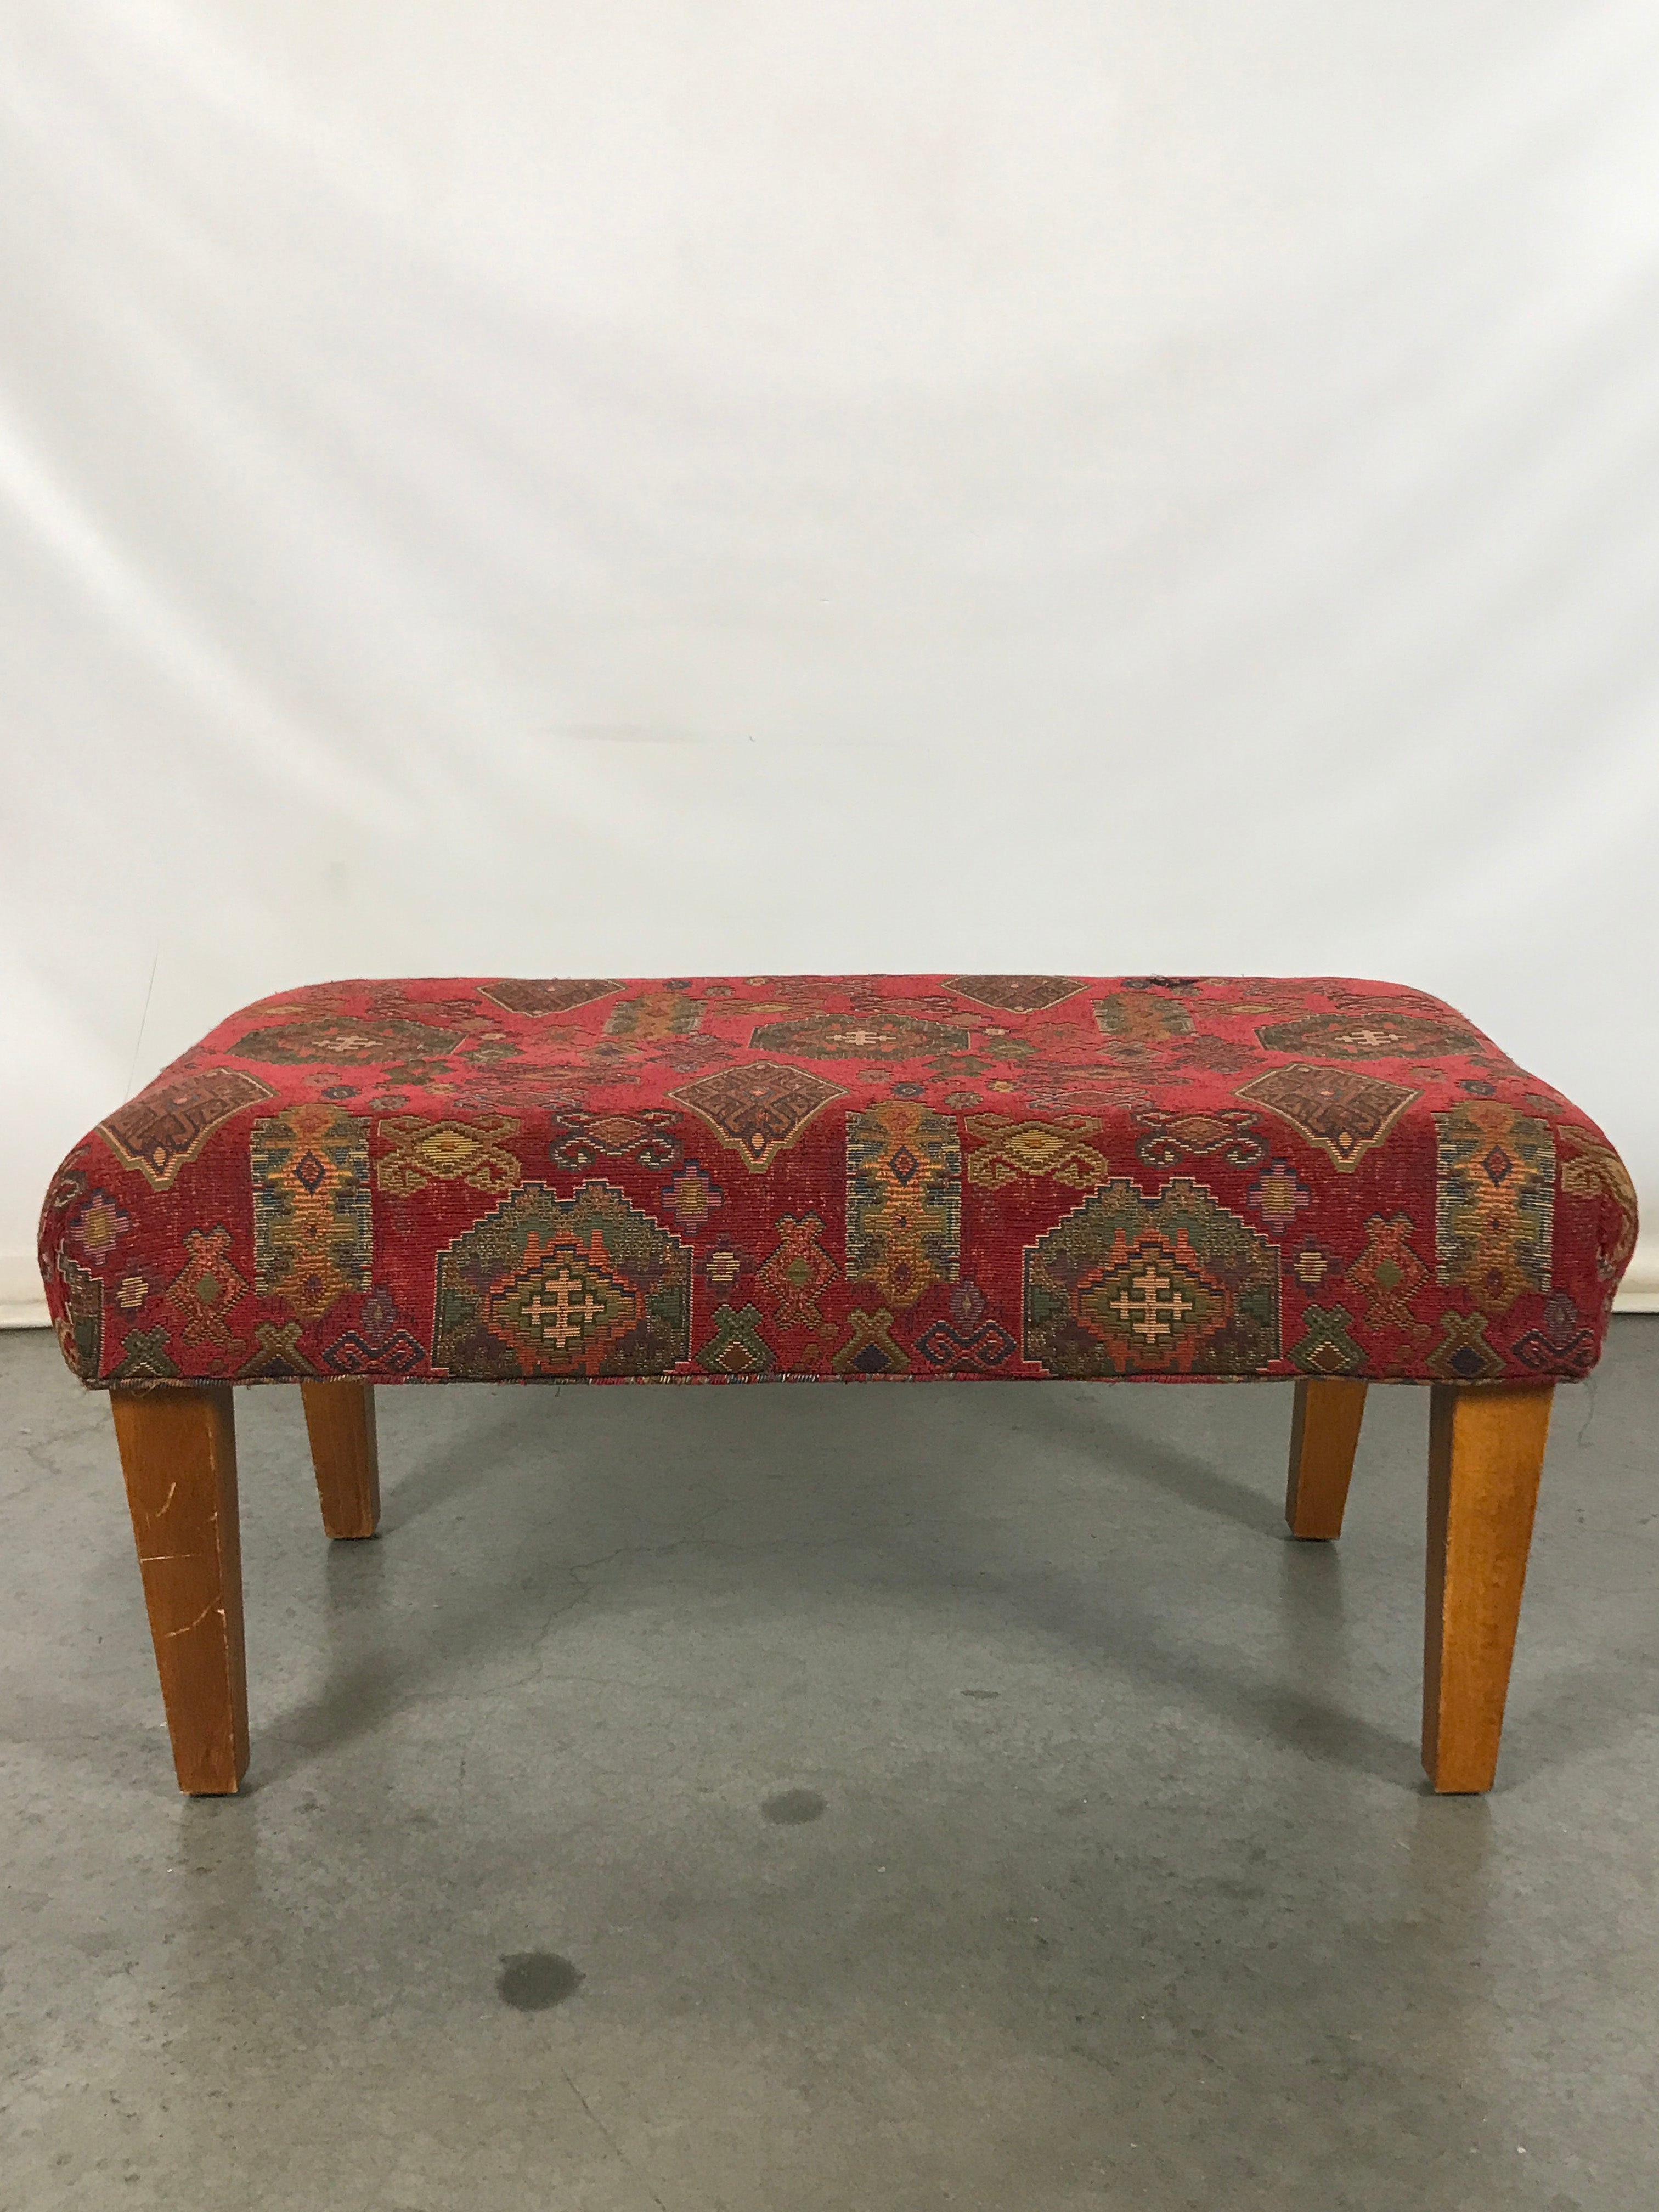 Upholstered Ottoman with Wooden Legs